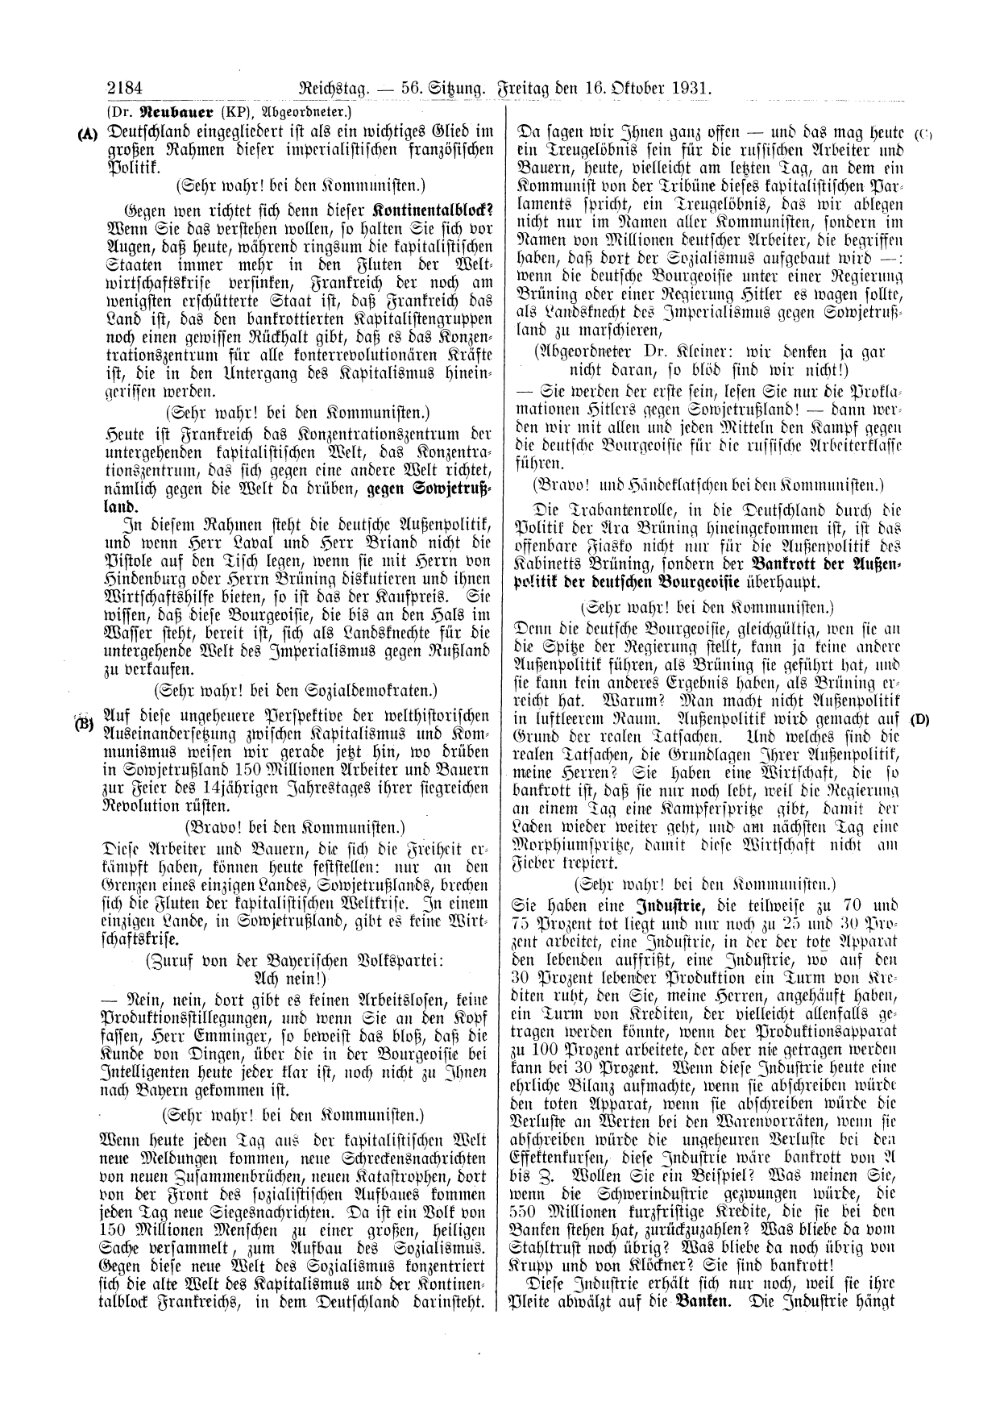 Scan of page 2184